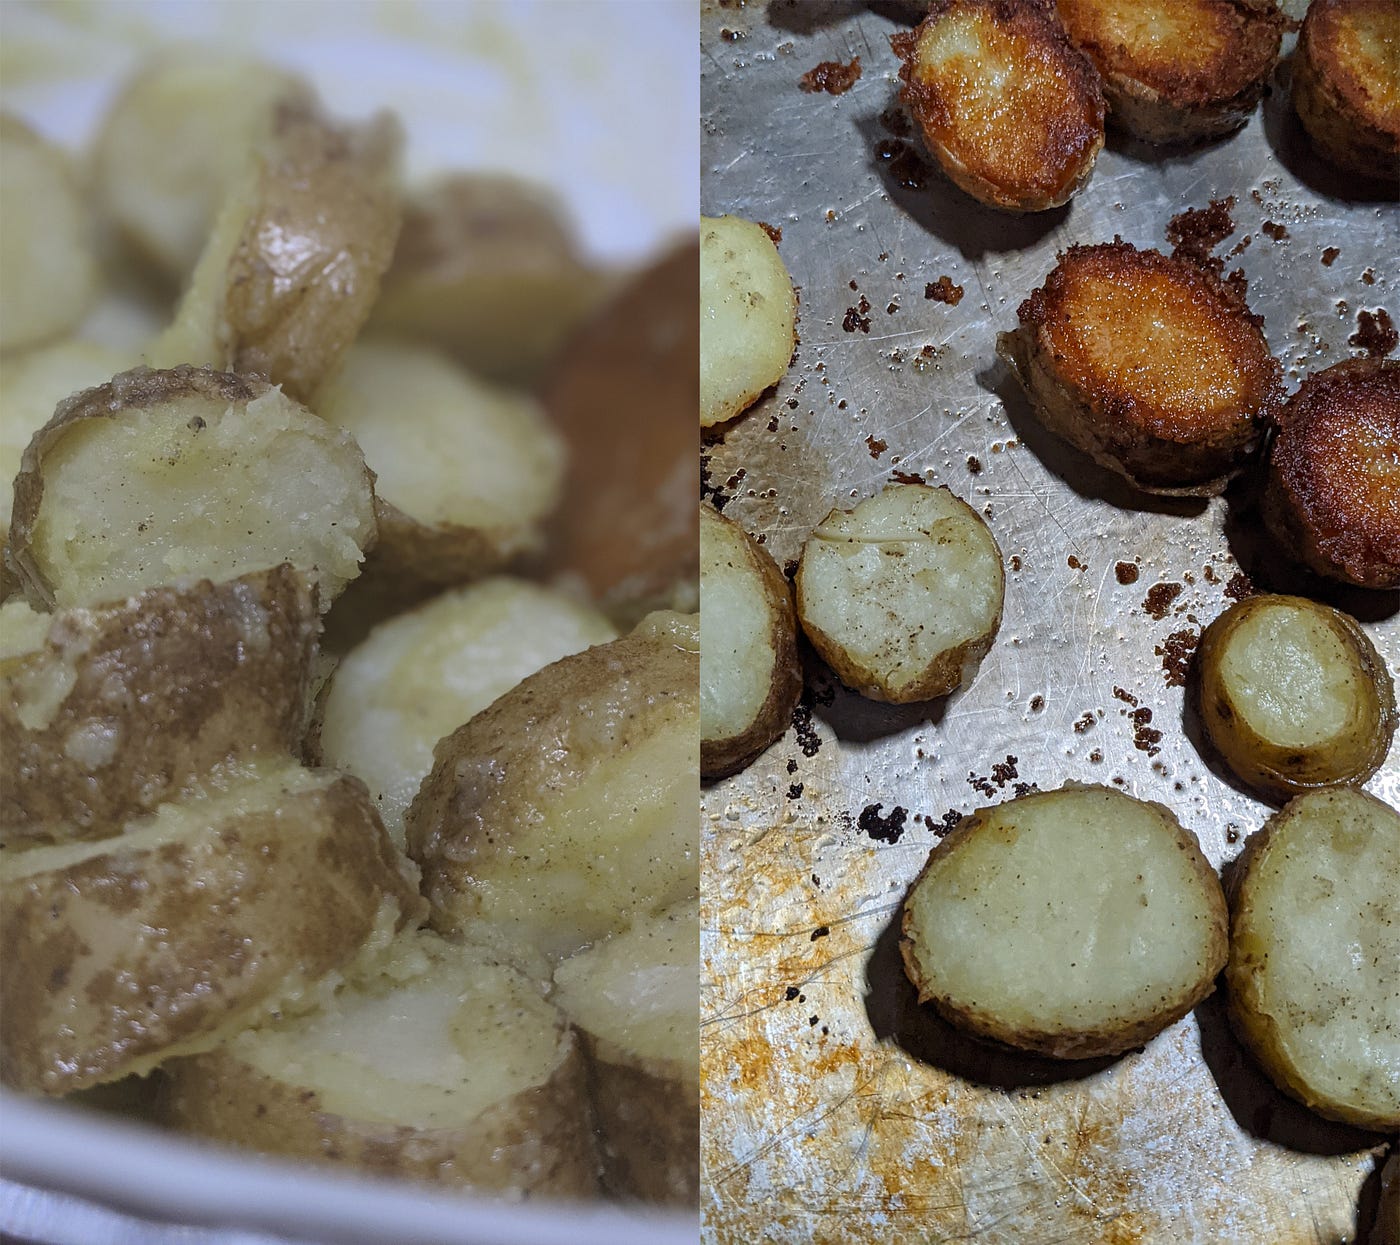 Potatoes tossed with fat and potatoes halfway through frying